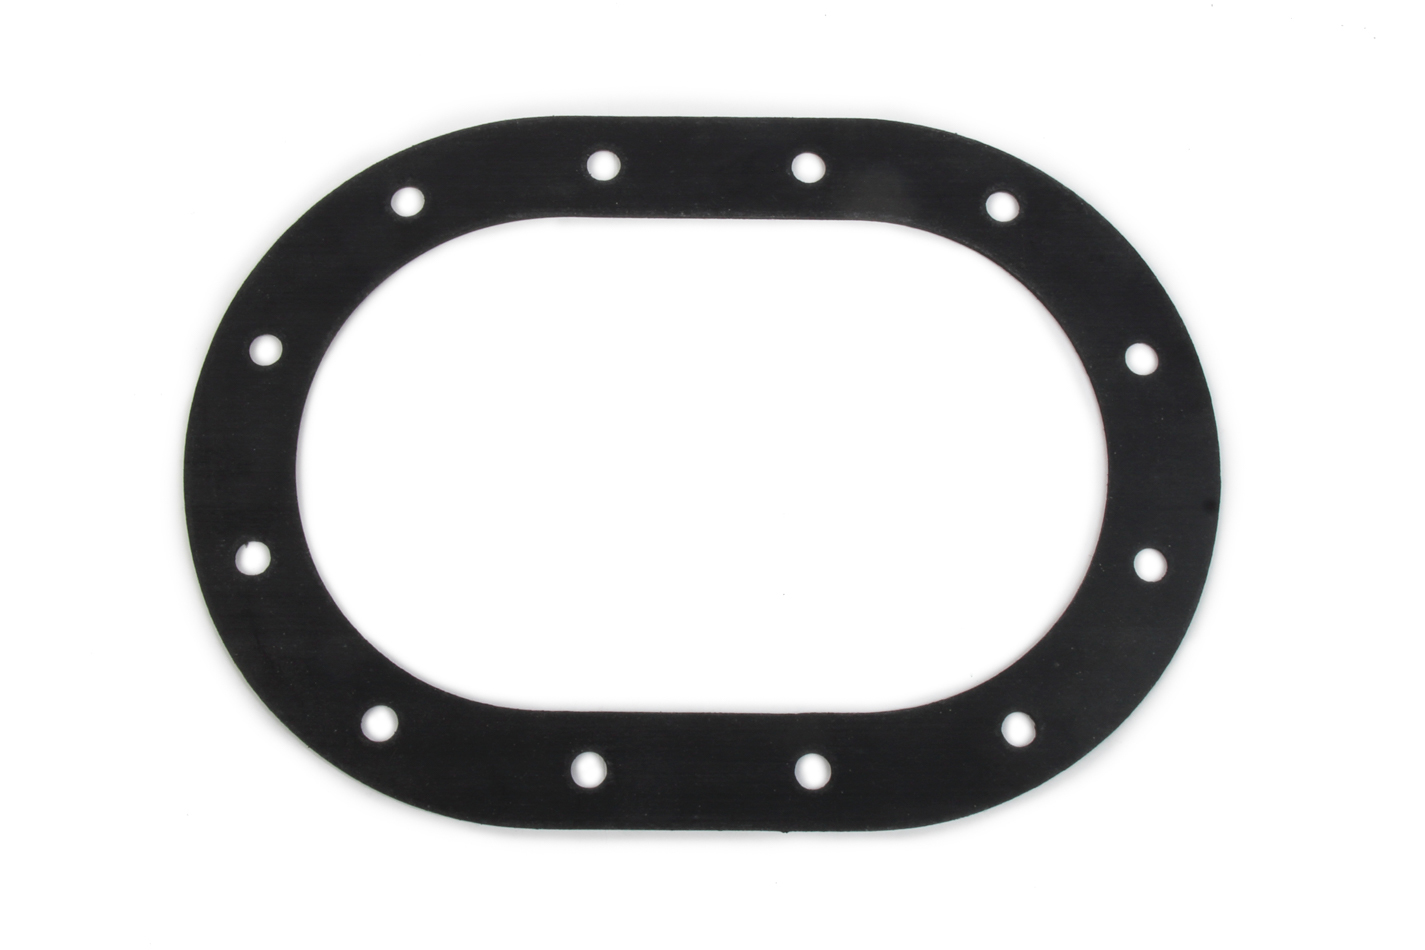 Saldana Racing Products SAC-006N Fuel Cell Fill Plate Gasket, 12-Bolt, 4 x 6 in Oval, Rubber, Natural, Each